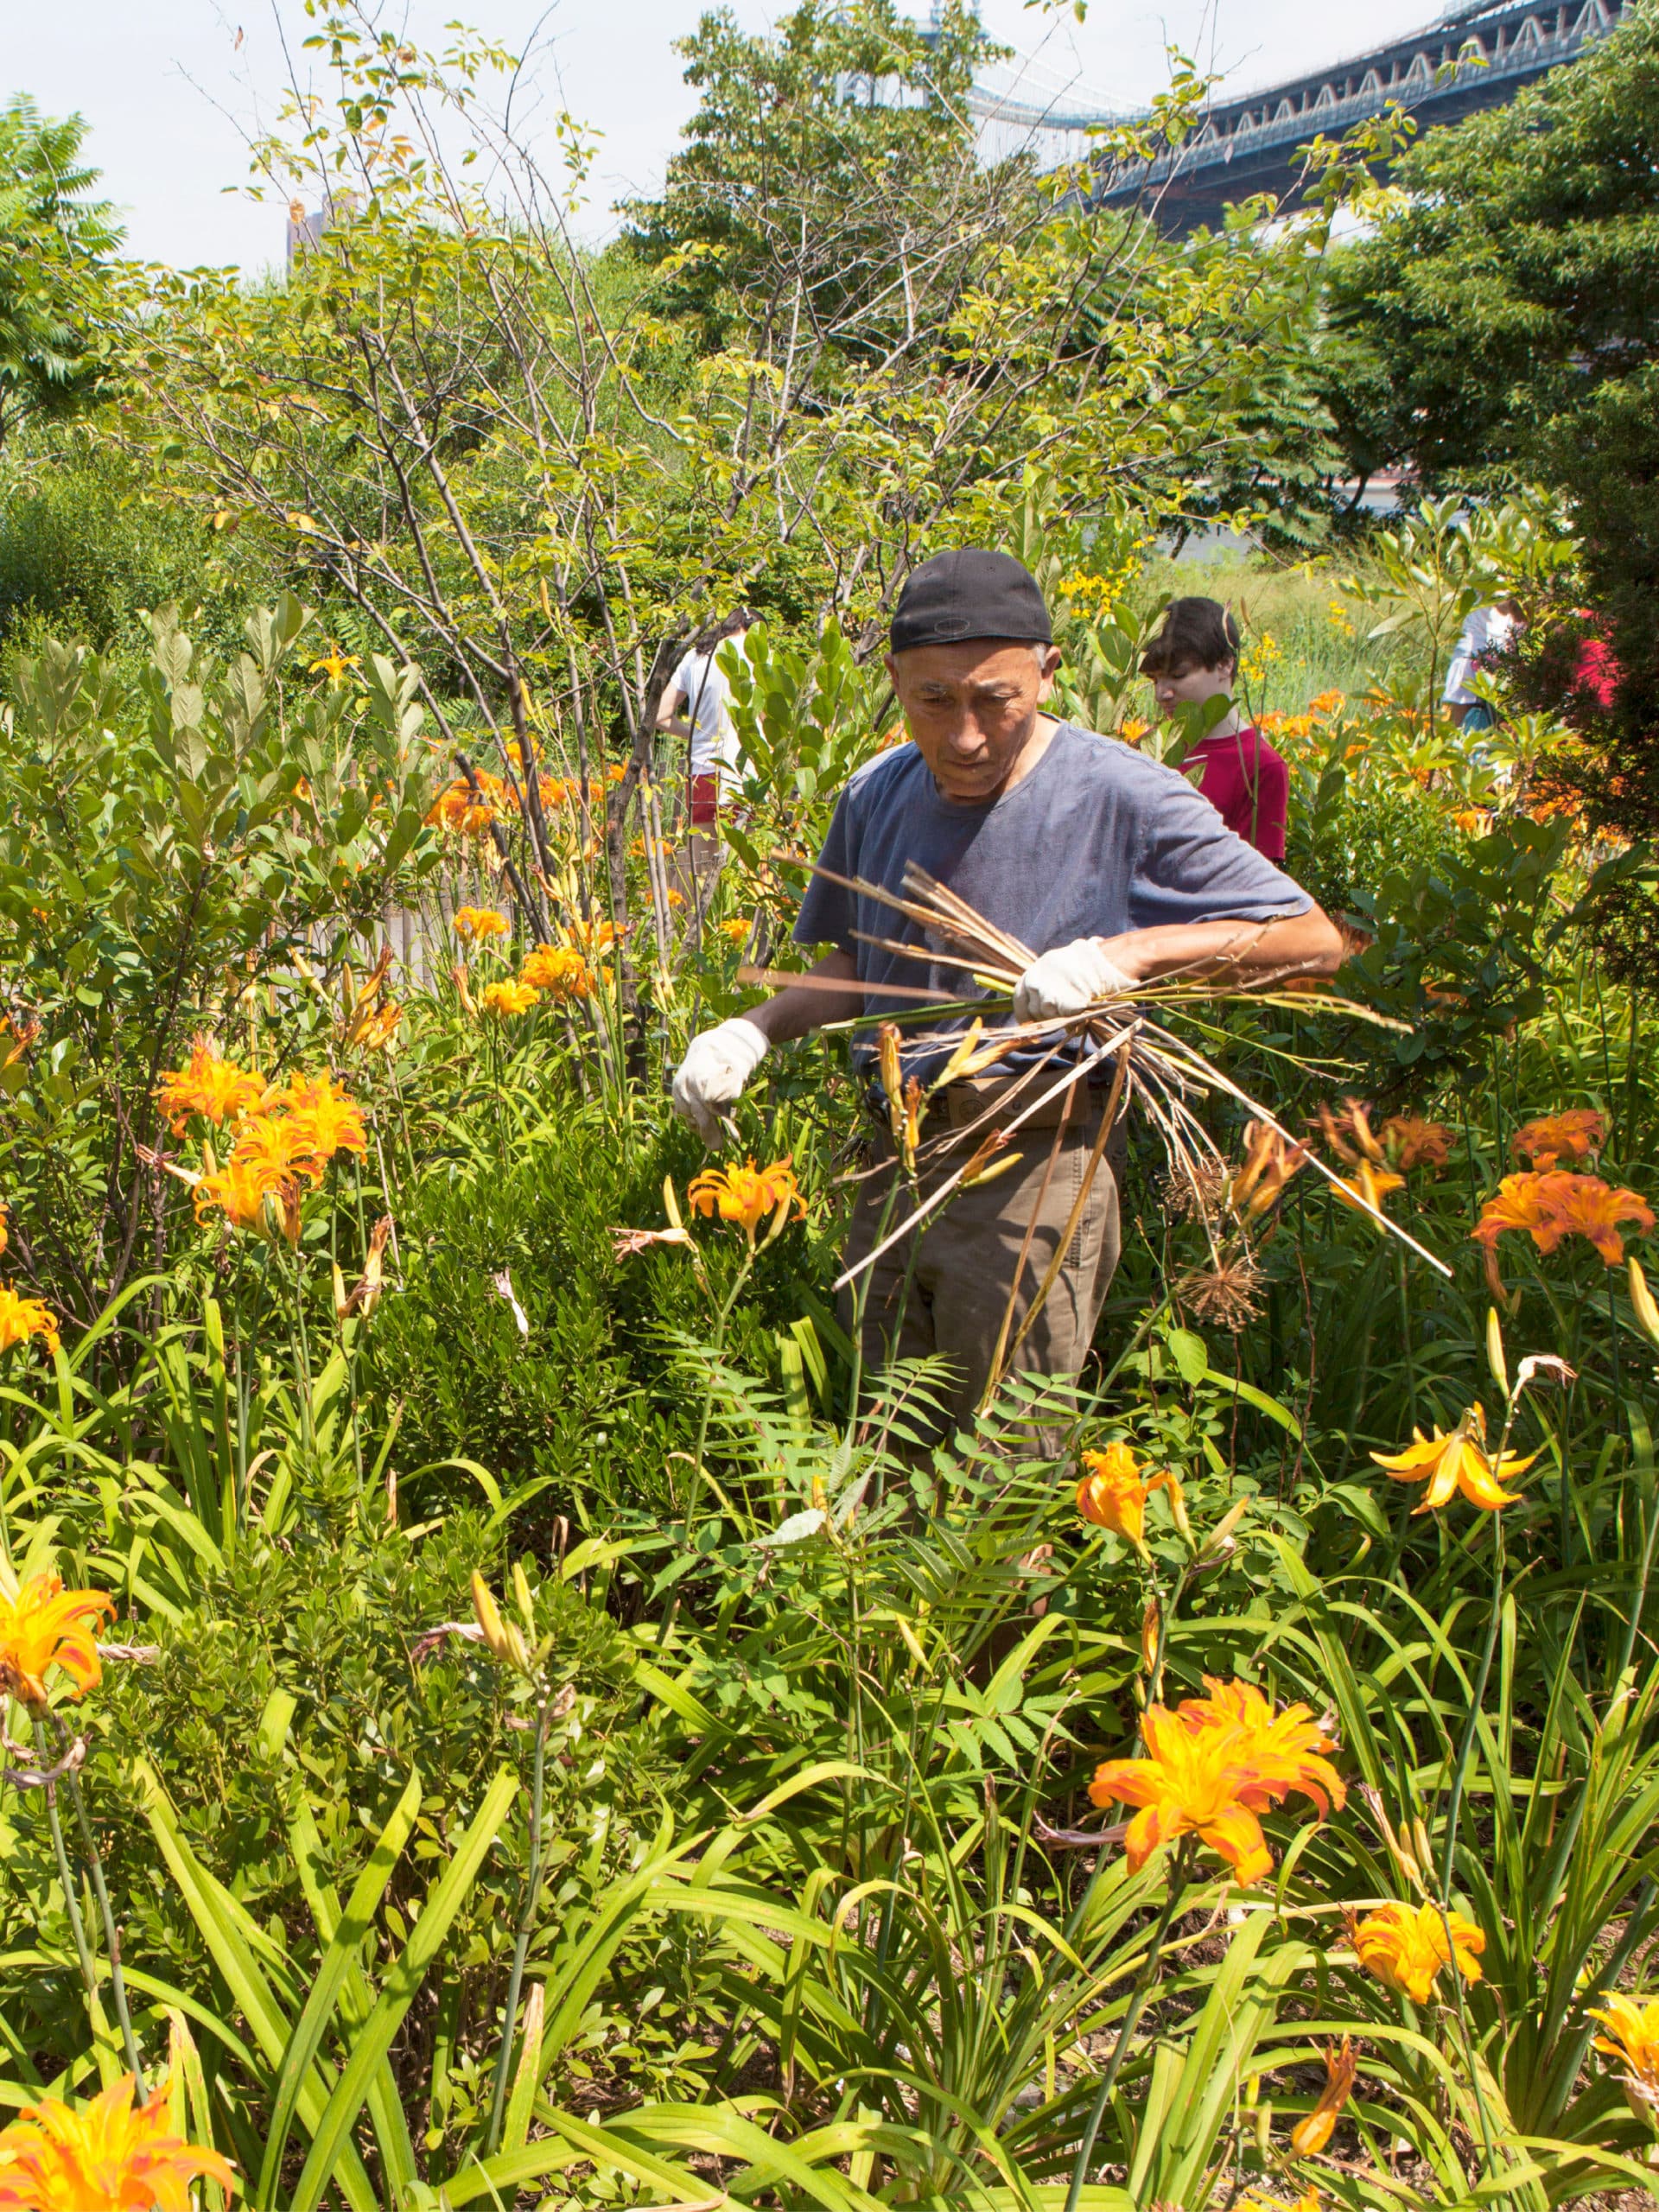 Volunteer holding plant waste walking through a bed of flowers on a sunny day.